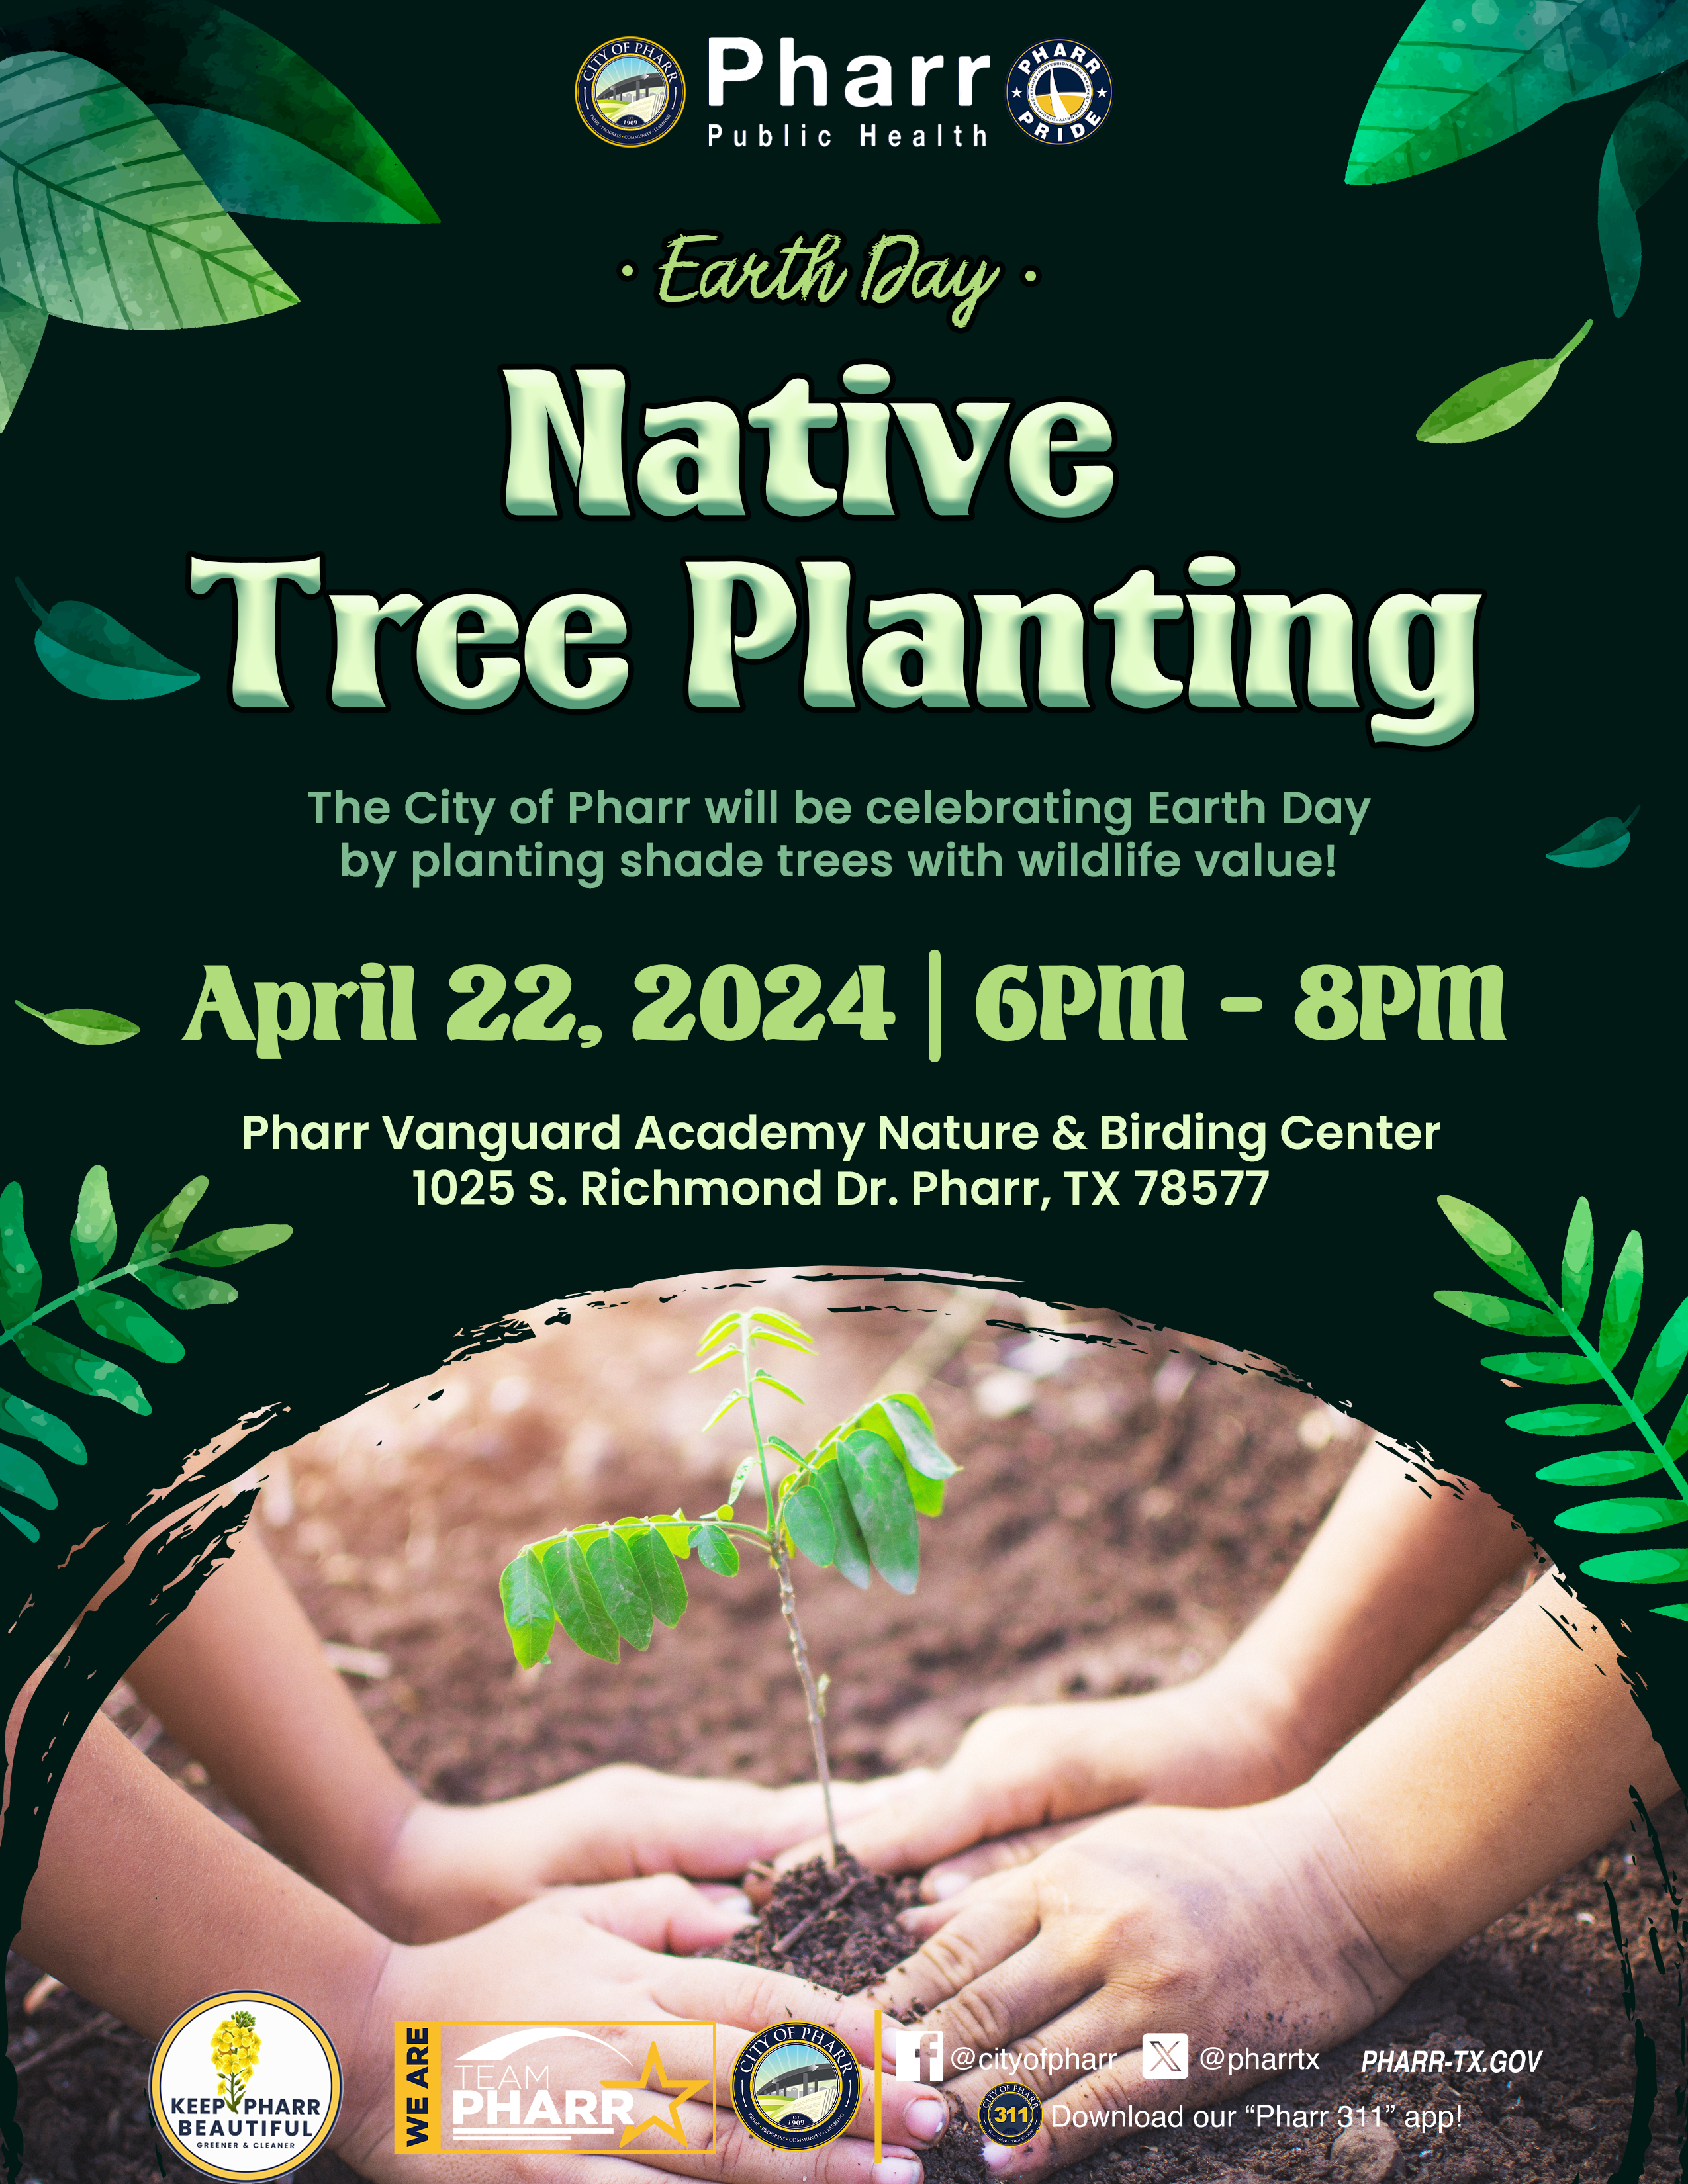 Earth Day Native Tree Planting